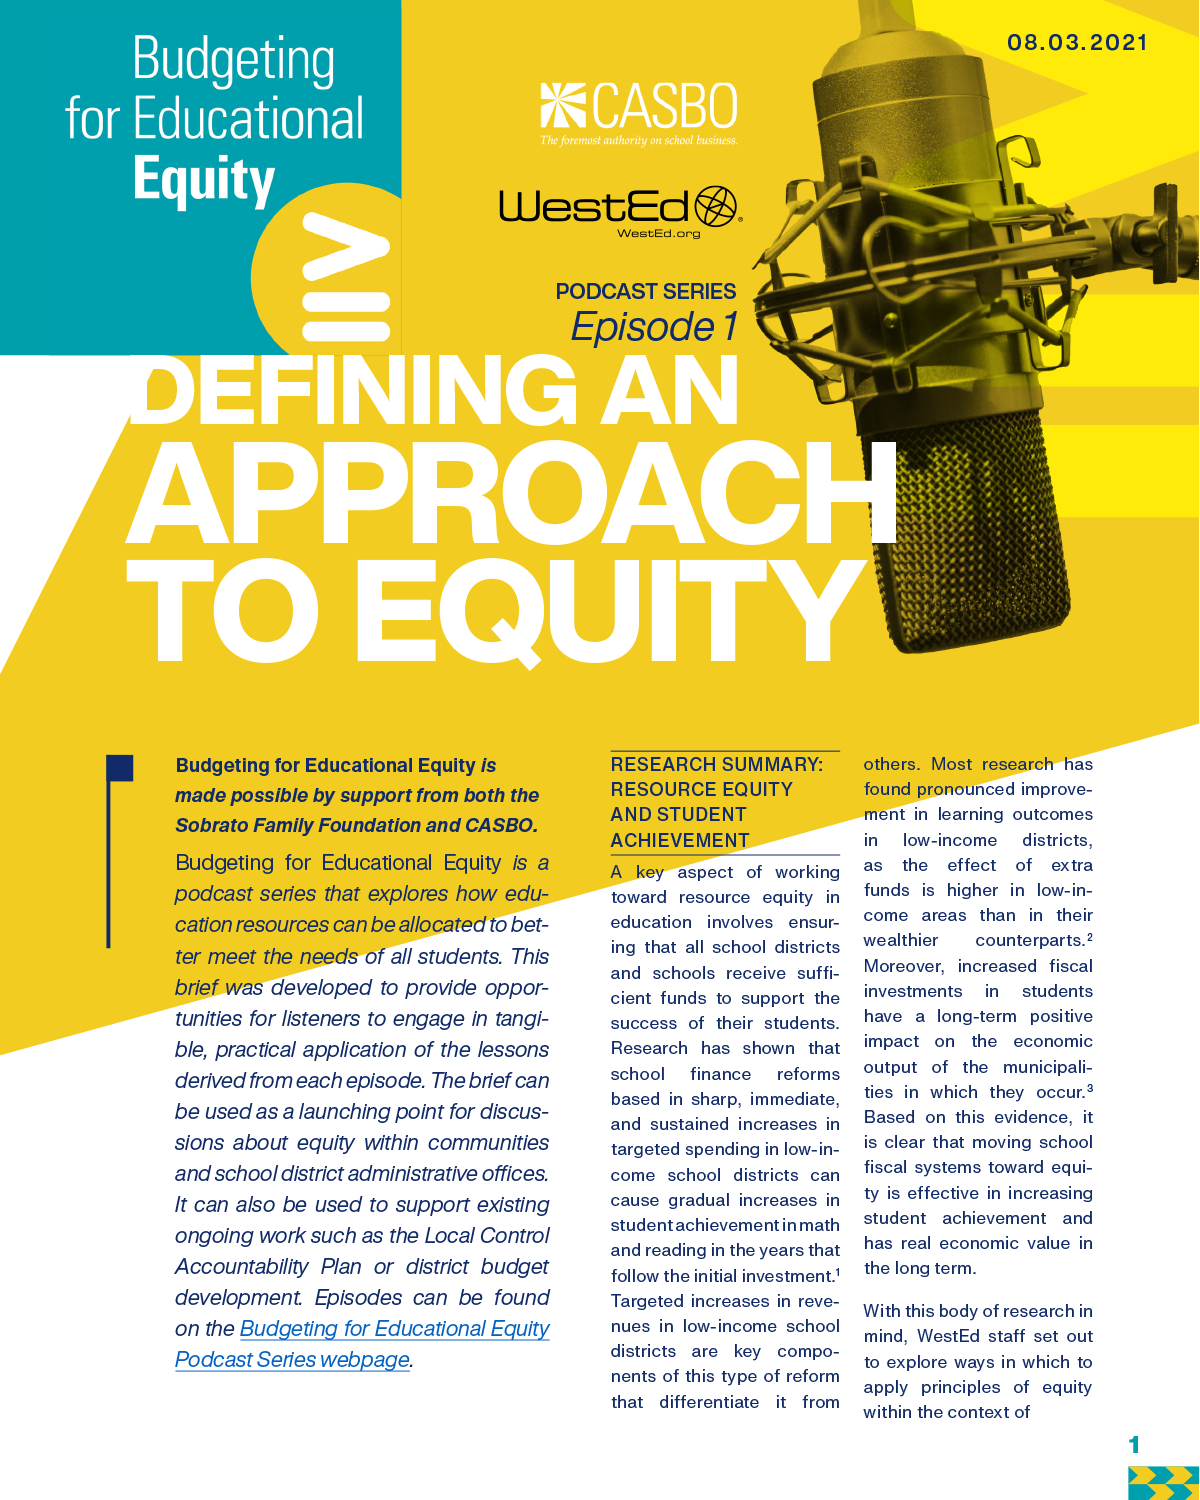 Podcast Series, Episode 1: Defining an approach to equity